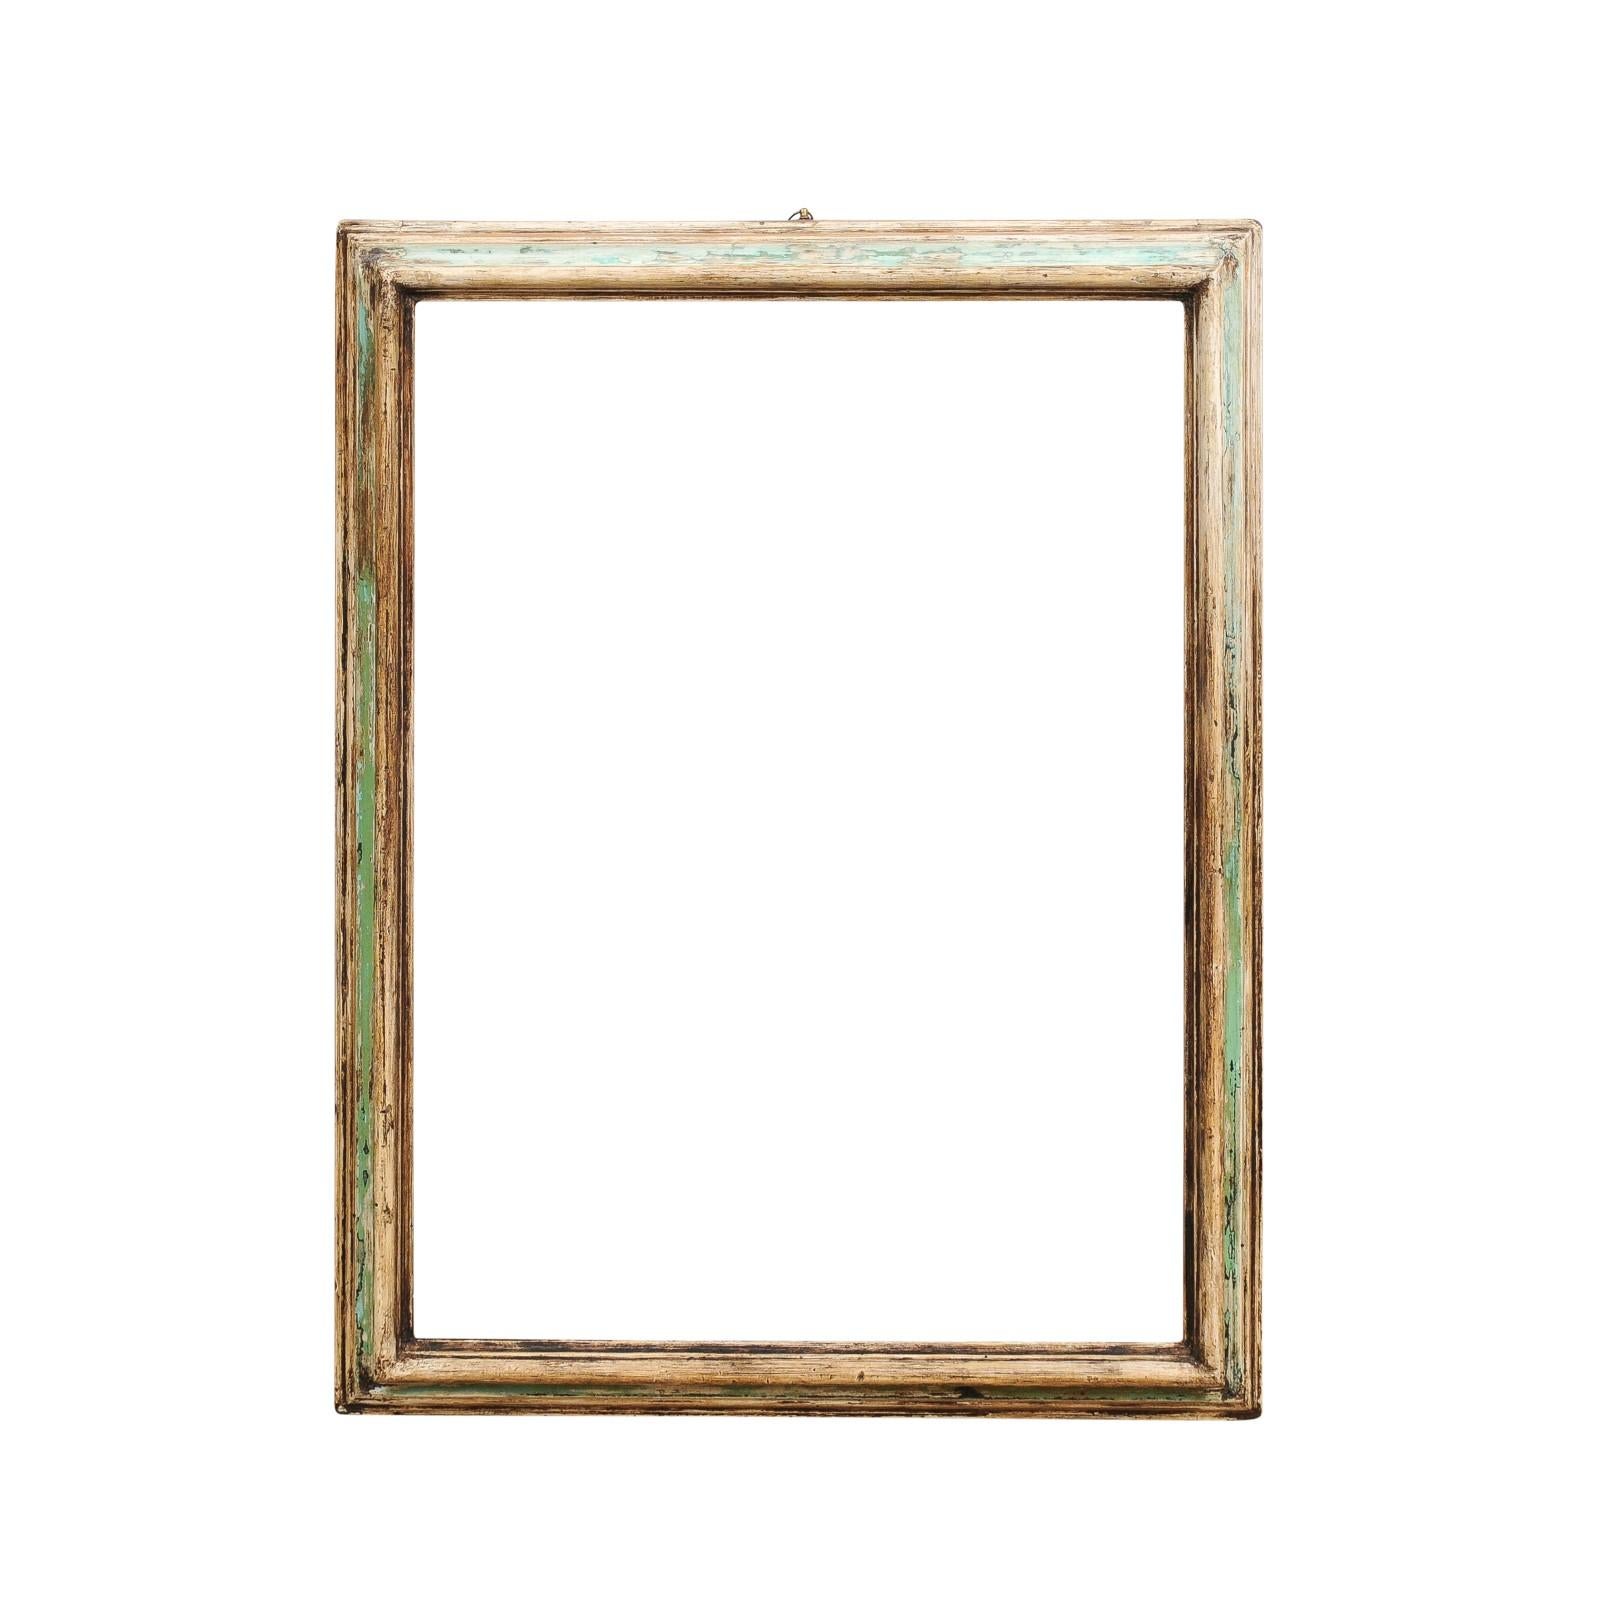 Italian 18th Century Green and Cream Painted Wooden Rectangular Frame For Sale 3